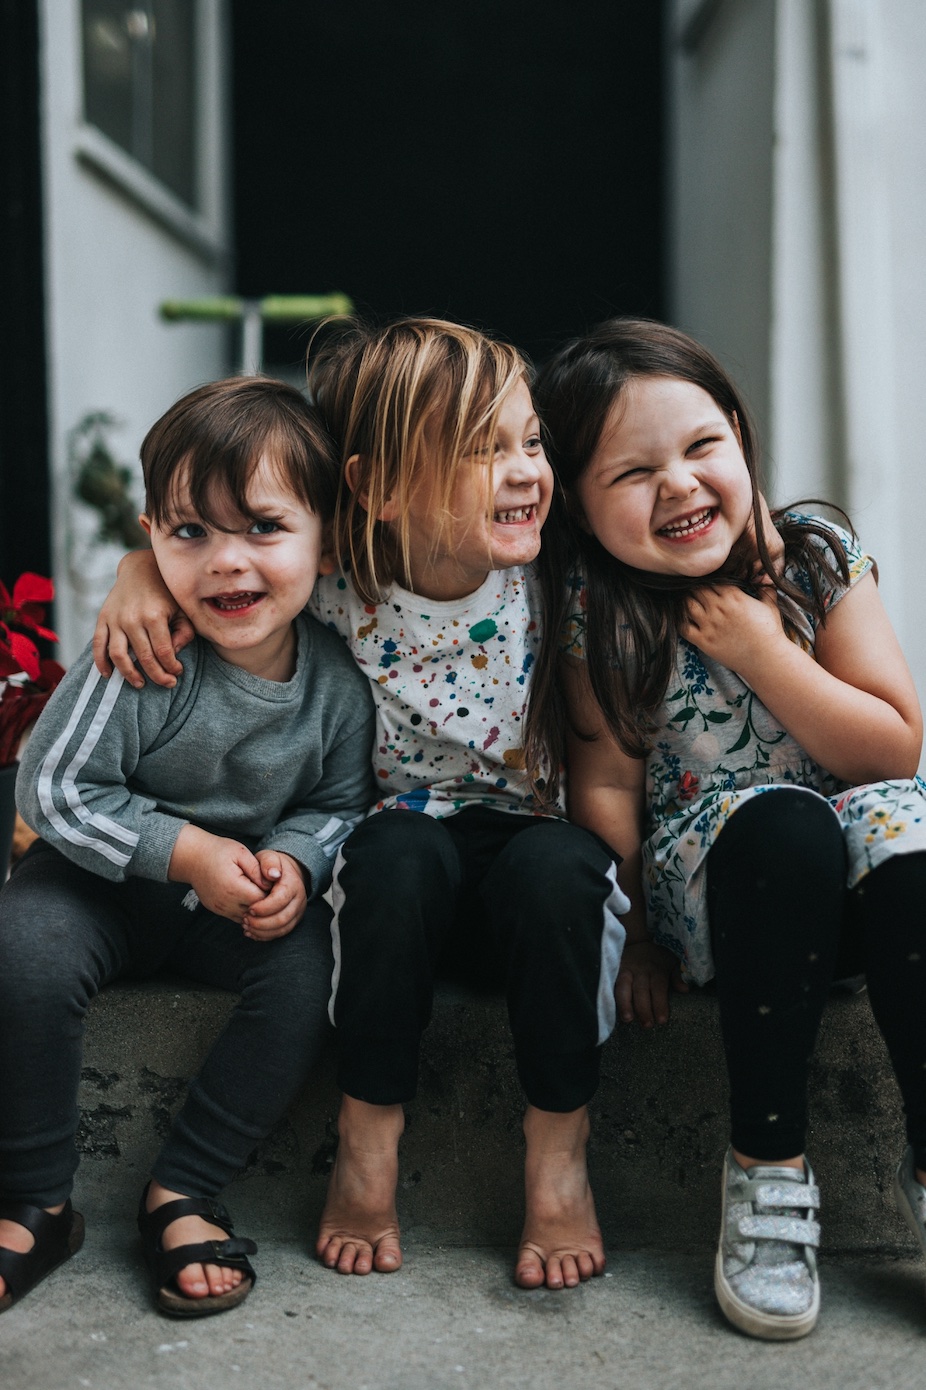 Two little girls and one little boy sitting on step; image by Nathan Dumlao, via Unsplash.com.